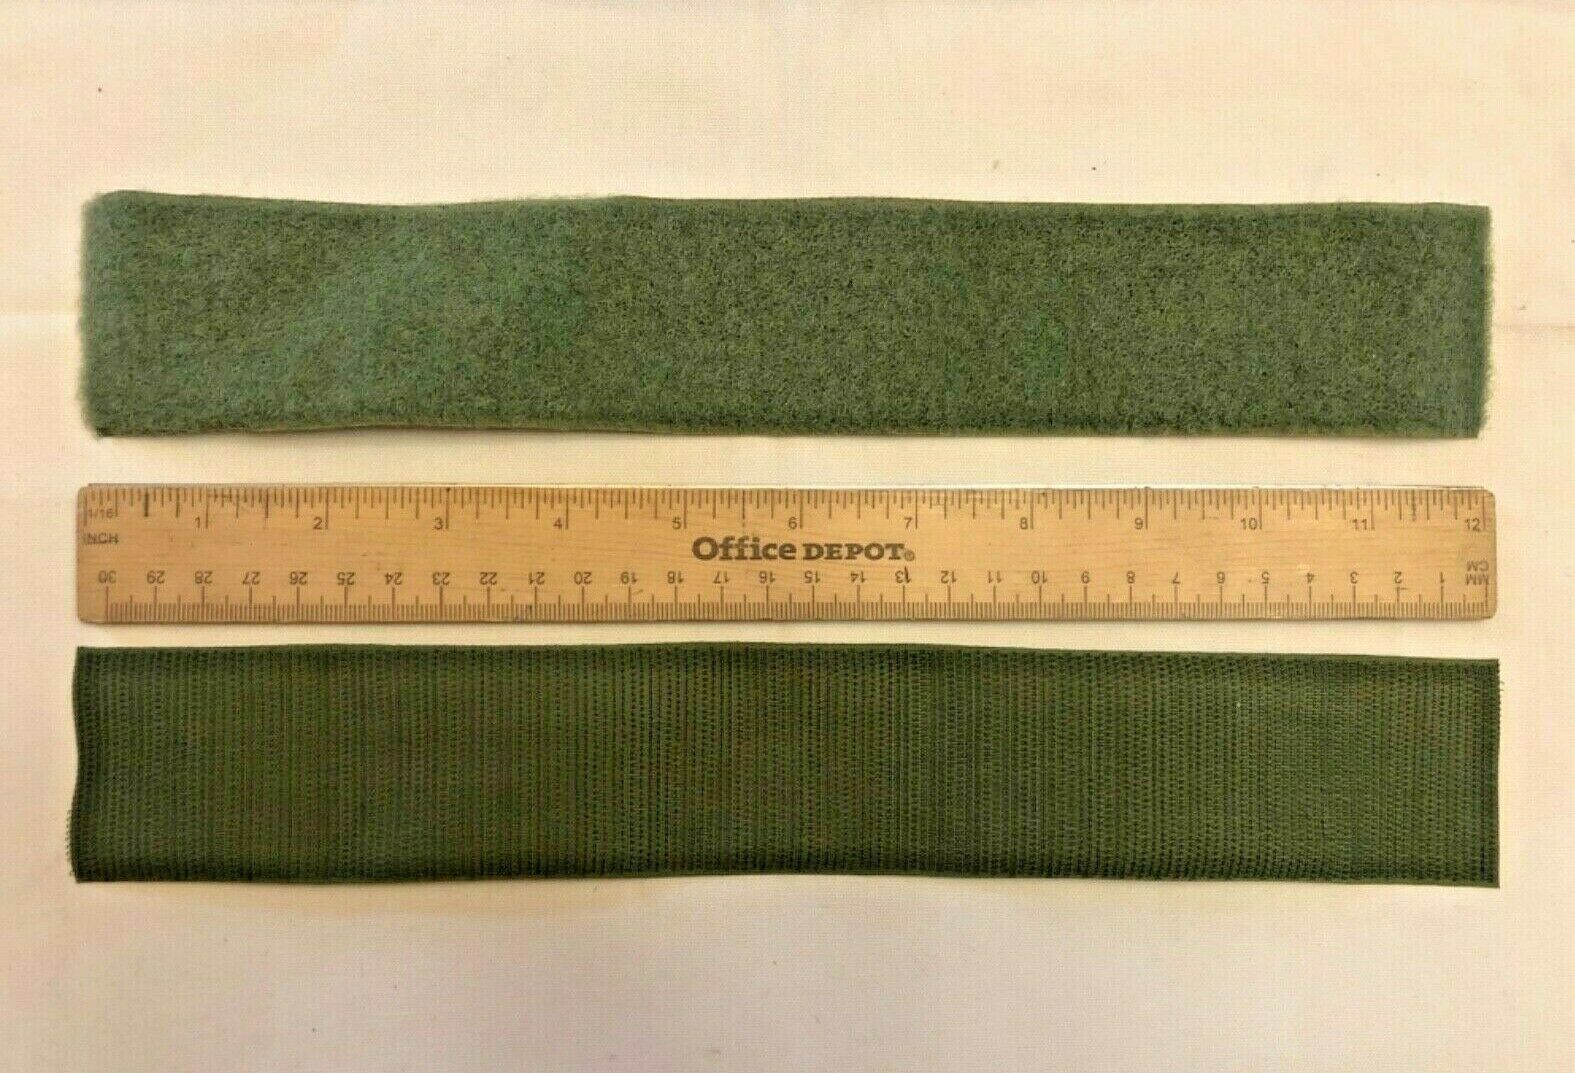 US MILITARY VELCRO® BRAND HOOK AND LOOP TAPE 50 MM 2 INCH OLIVE GREEN